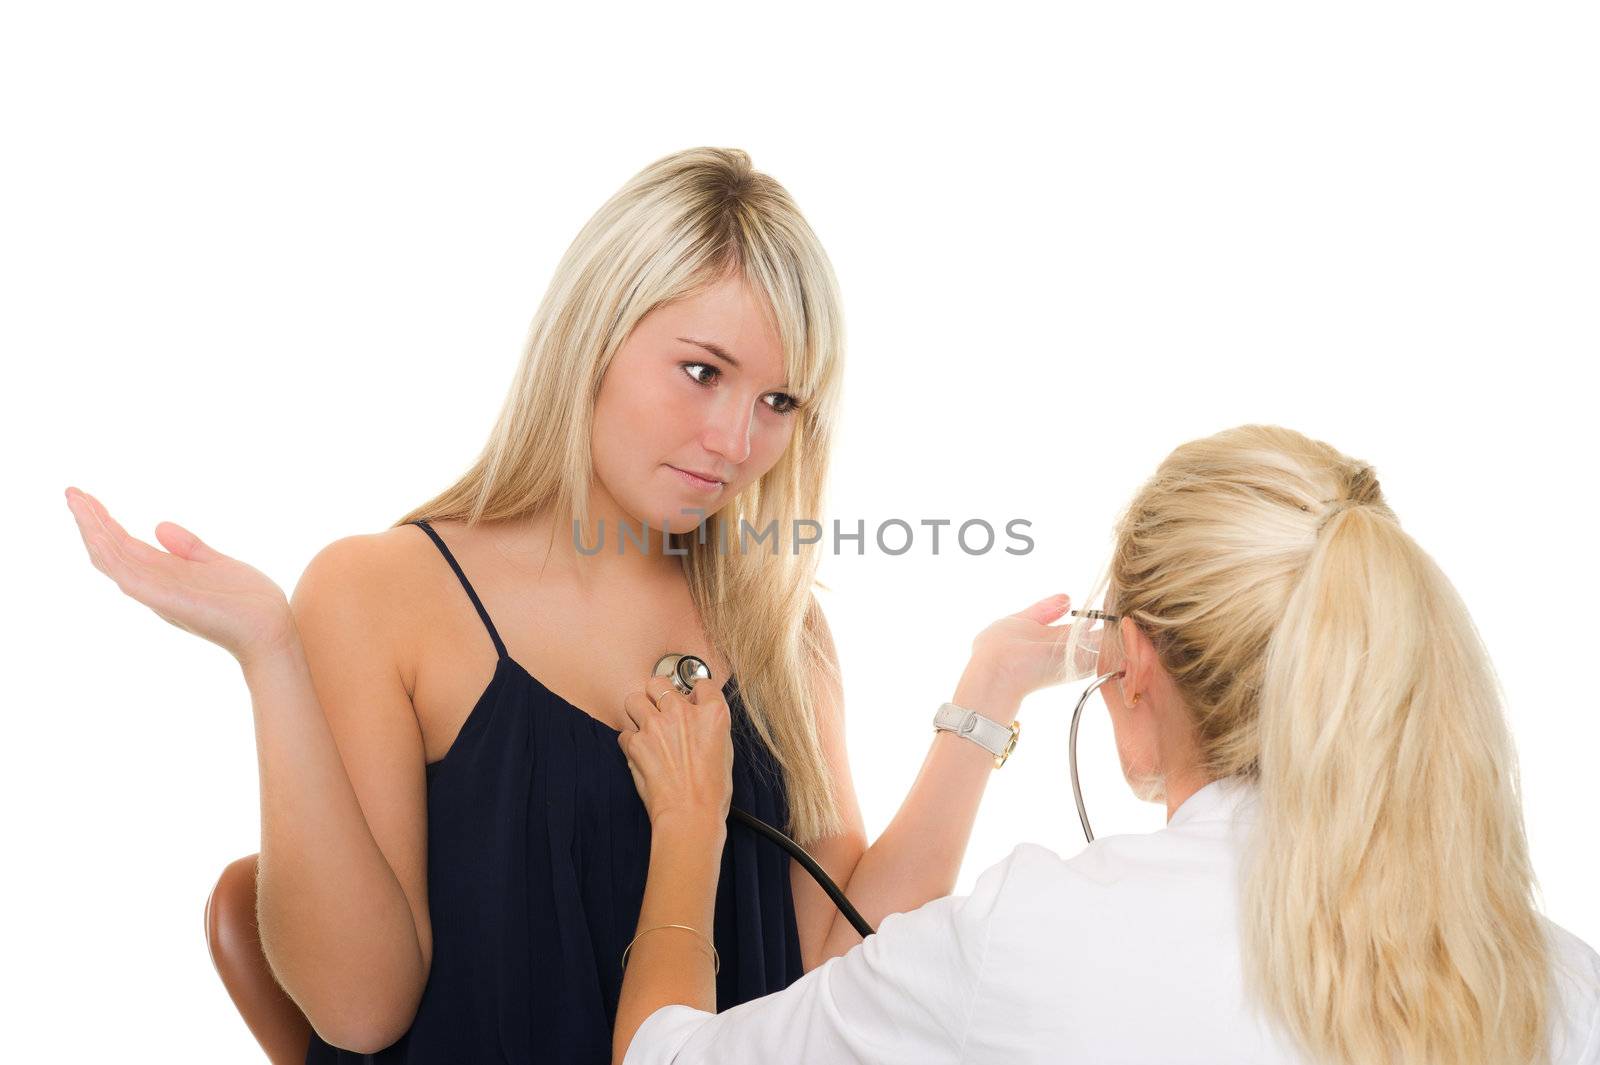 Young girl examined by doctor. Over white background